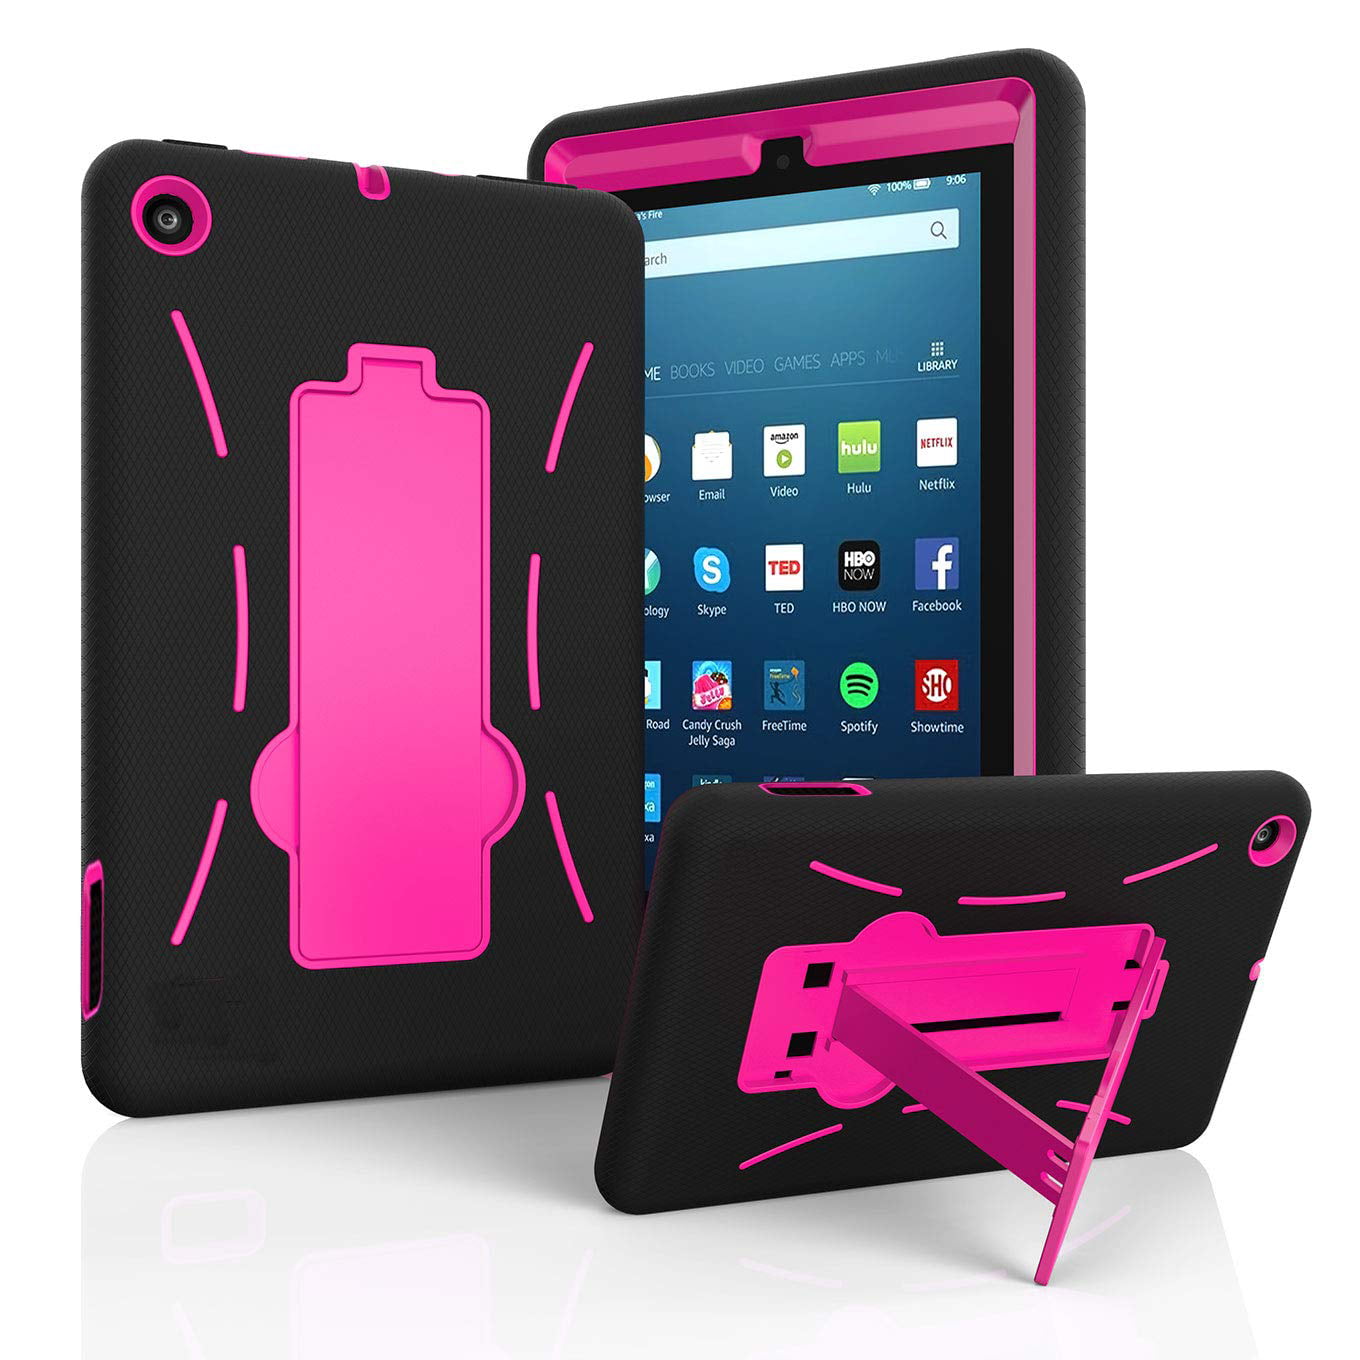 epicgadget-fire-7-2019-hybrid-case-for-amazon-fire-7-inch-tablet-9th